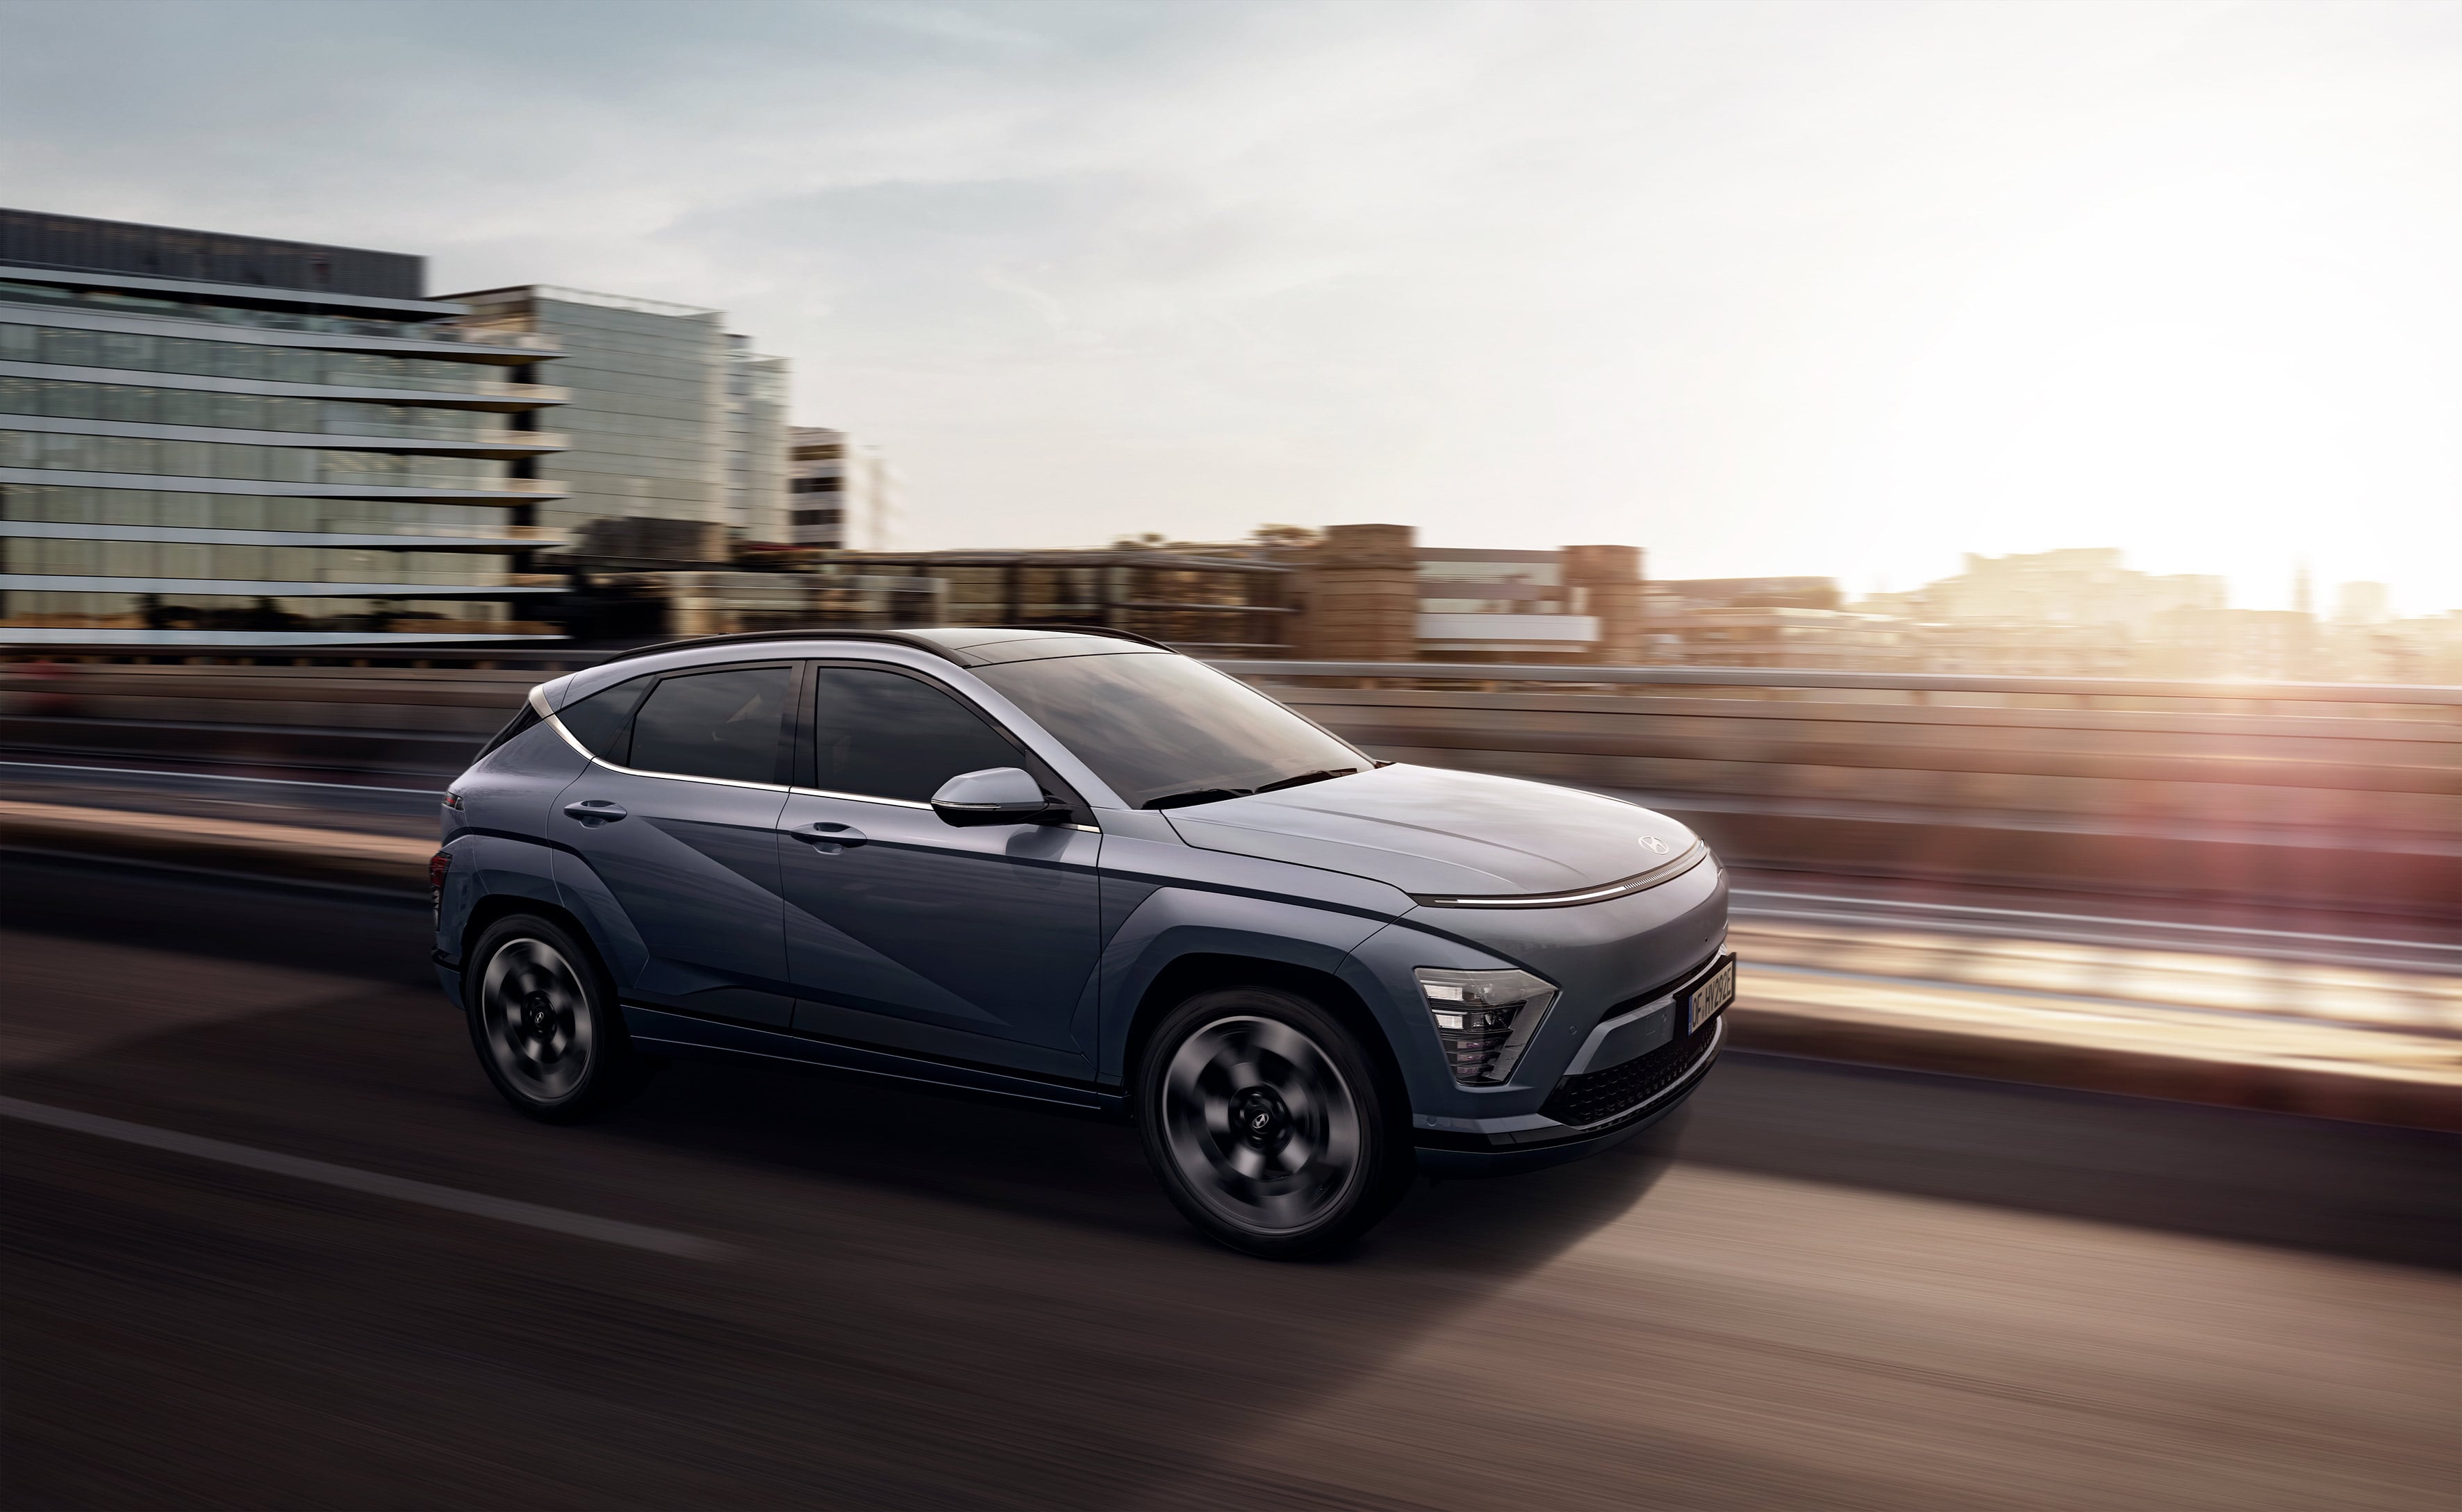 The all-new Hyundai KONA in blue is pictured driving down a city.